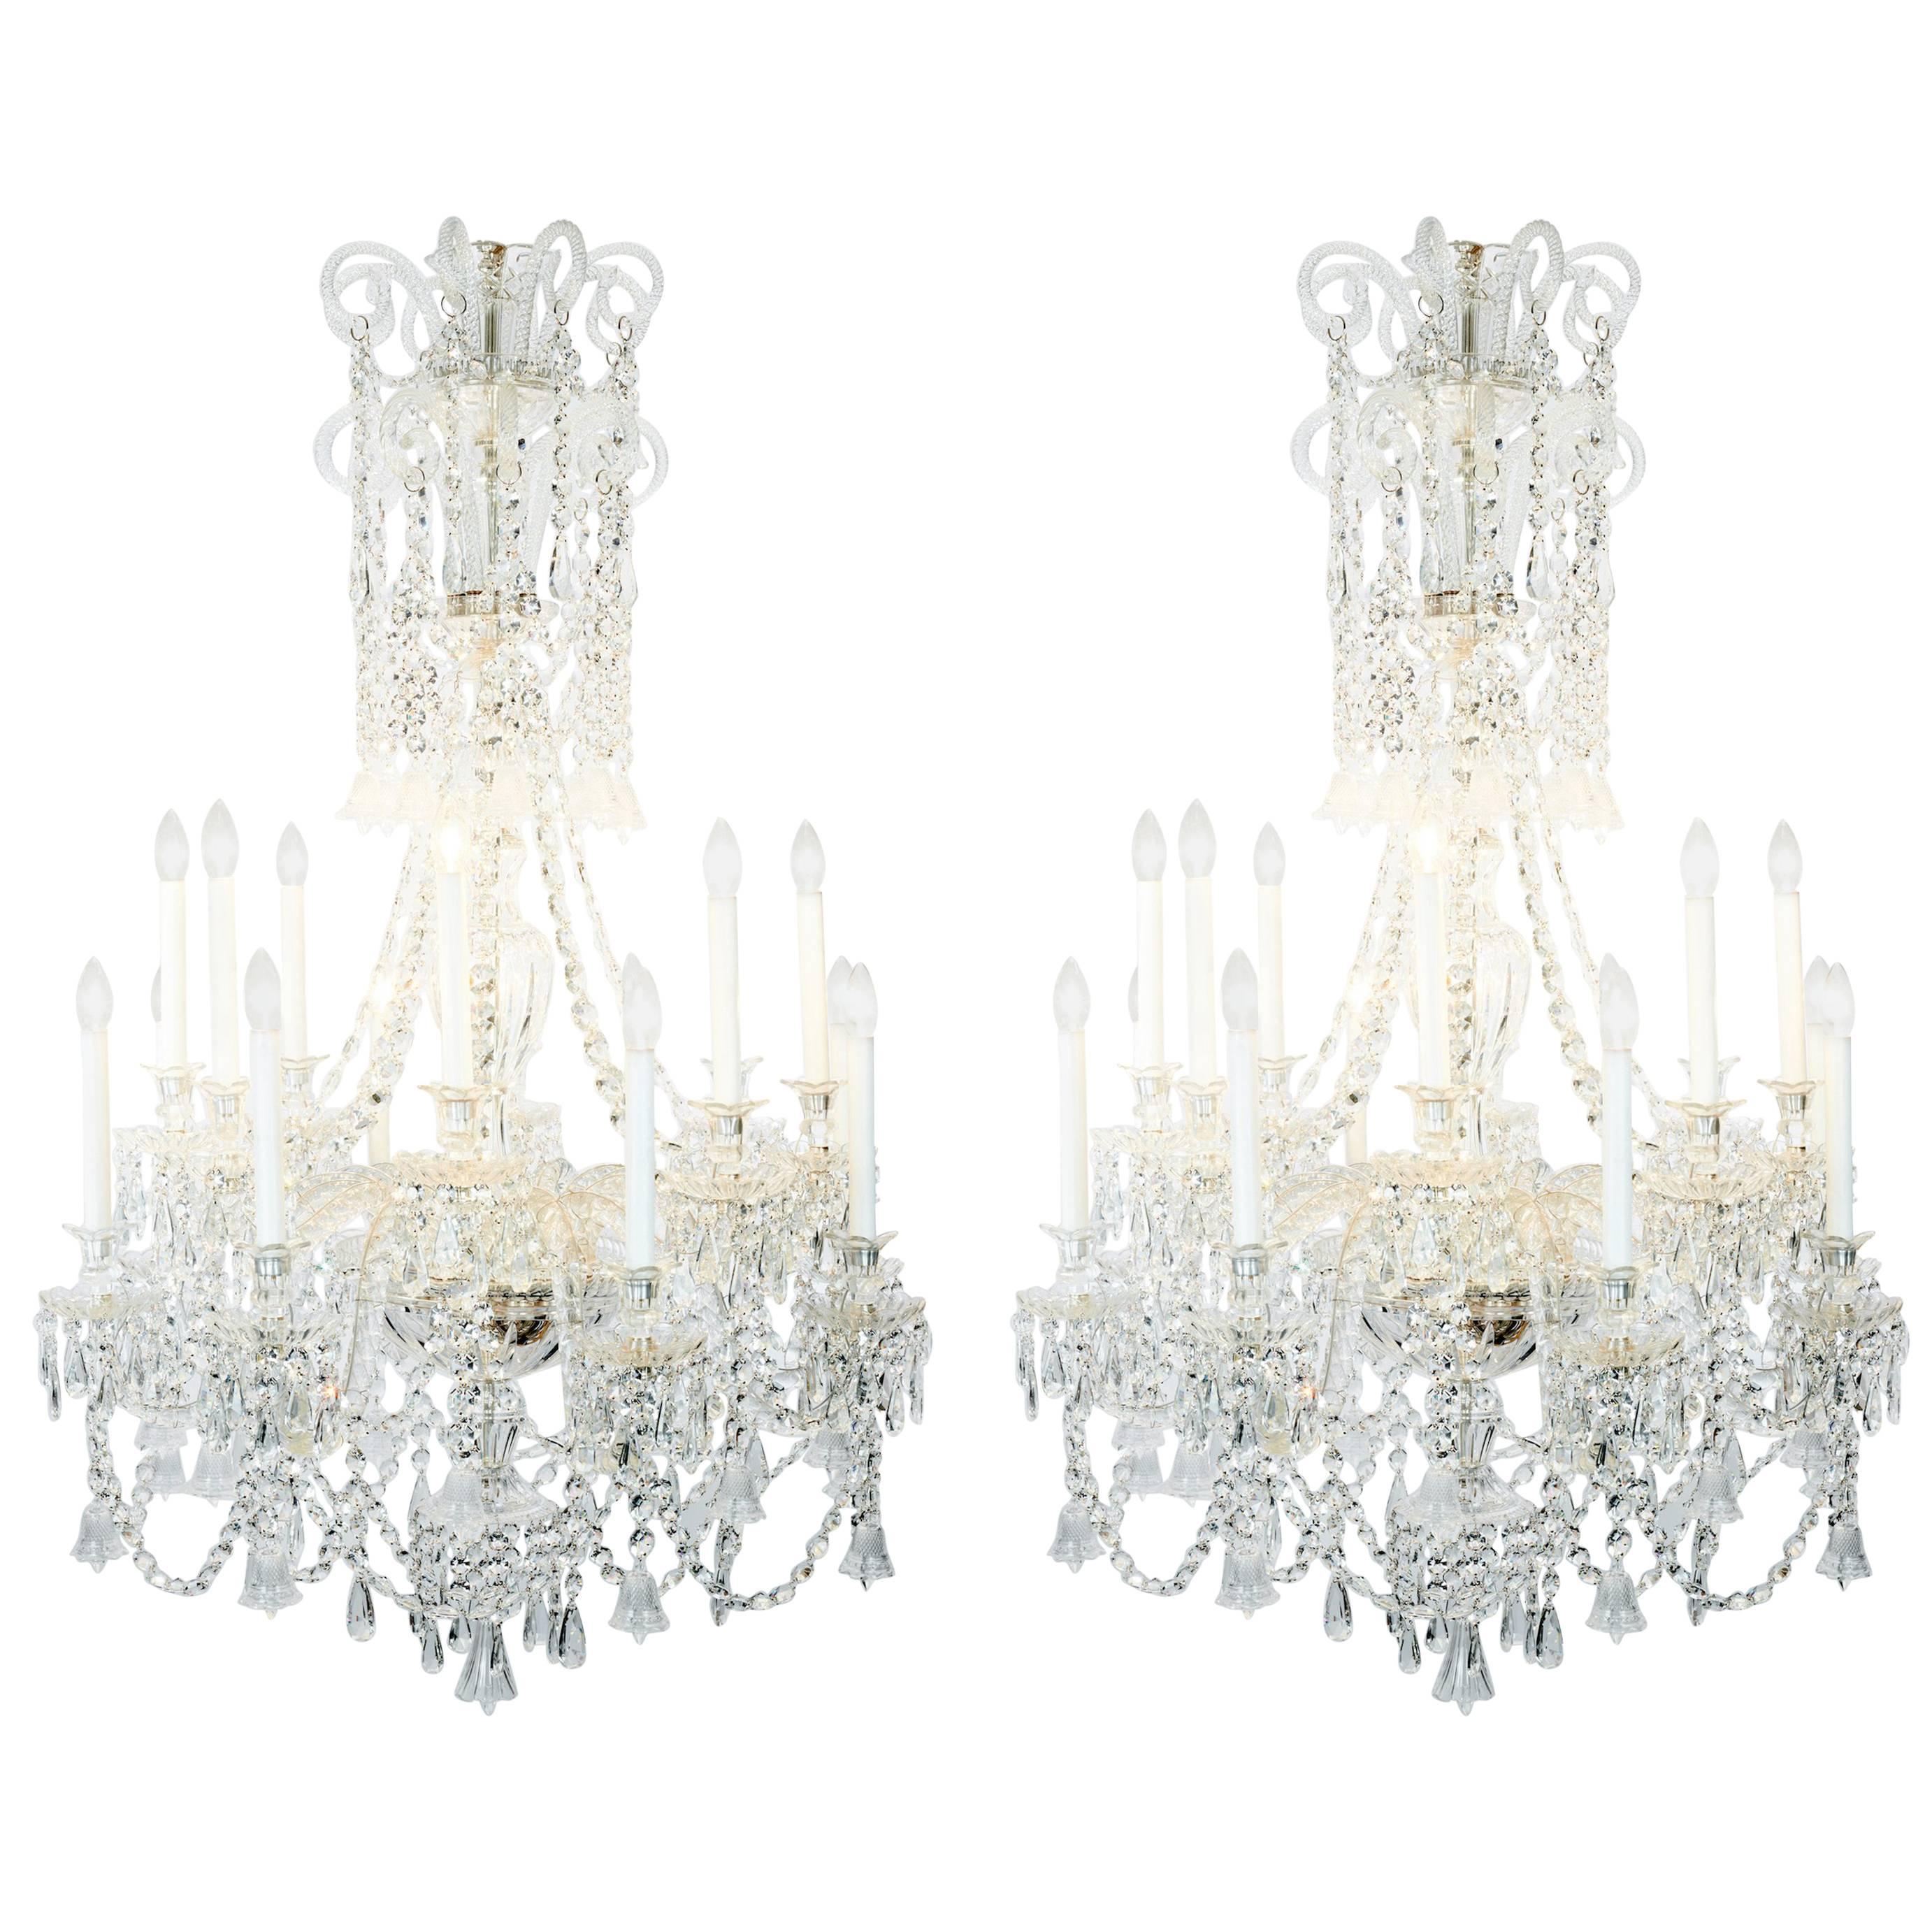 Pair of Exquisite Baccarat Crystal Chandeliers,